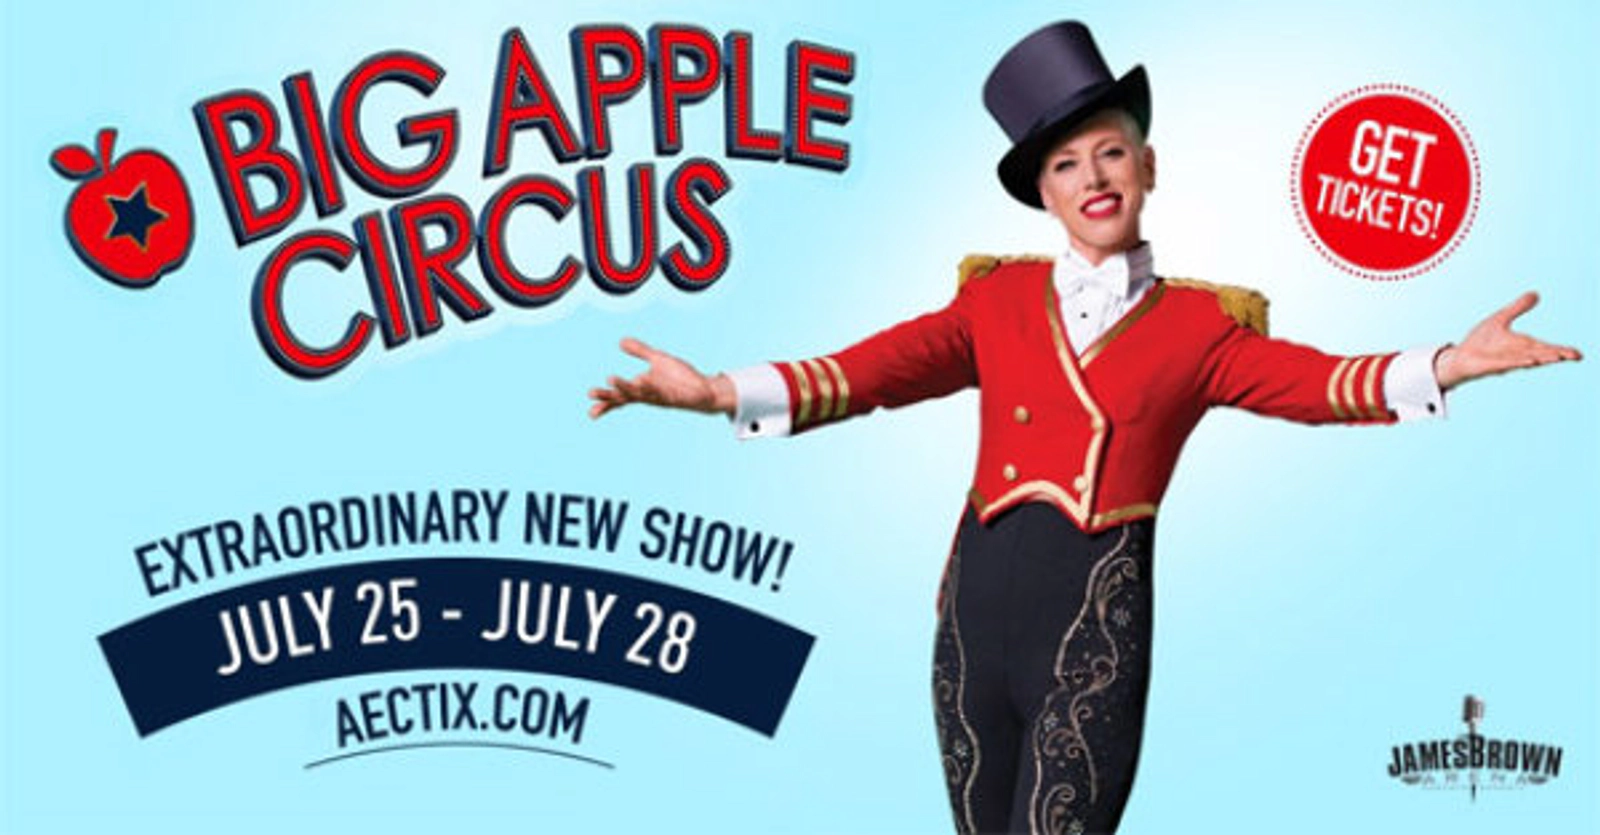 Family 4-Pack to the BIG APPLE CIRCUS! - Thumbnail Image